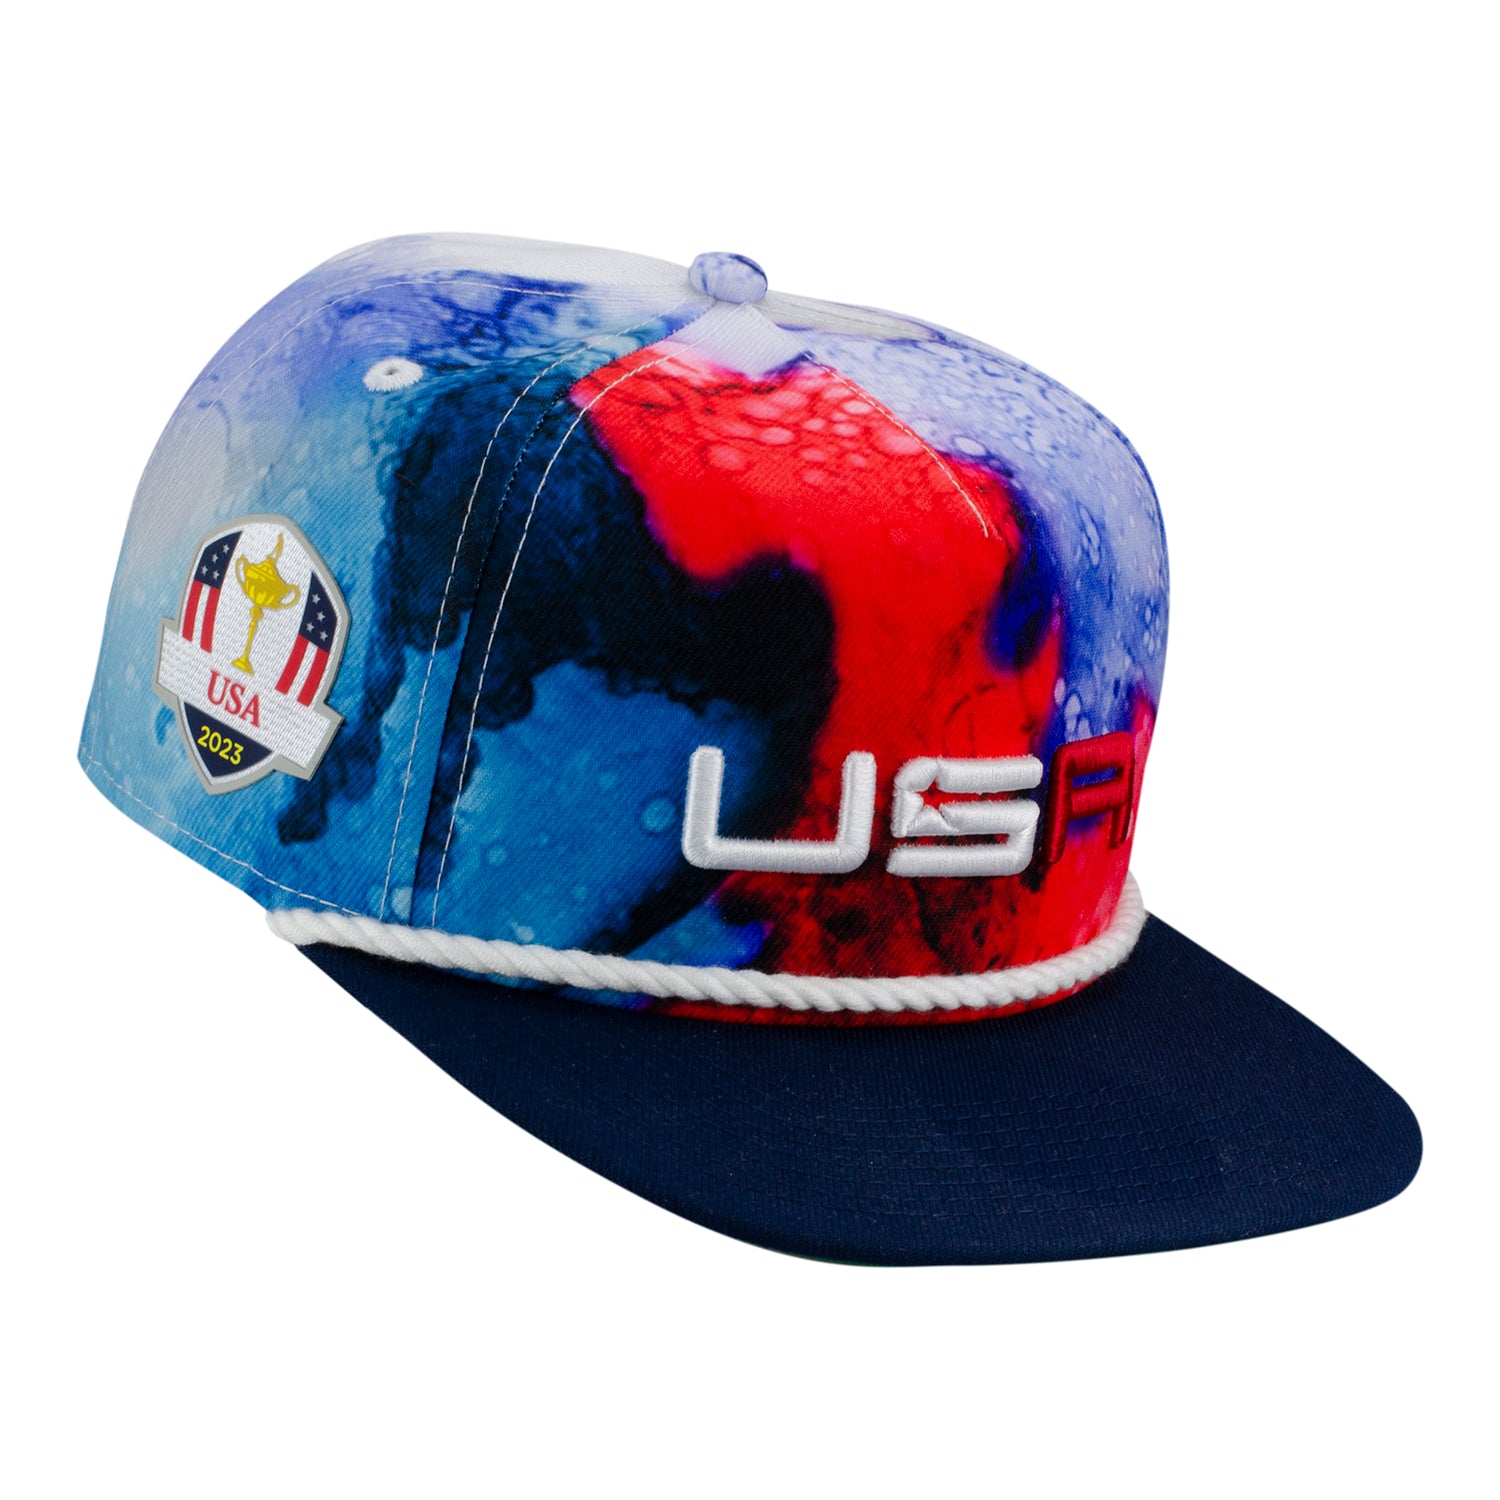 2023 Ryder Cup Team USA White 59FIFTY Fitted Hat - Size: 7, by New Era